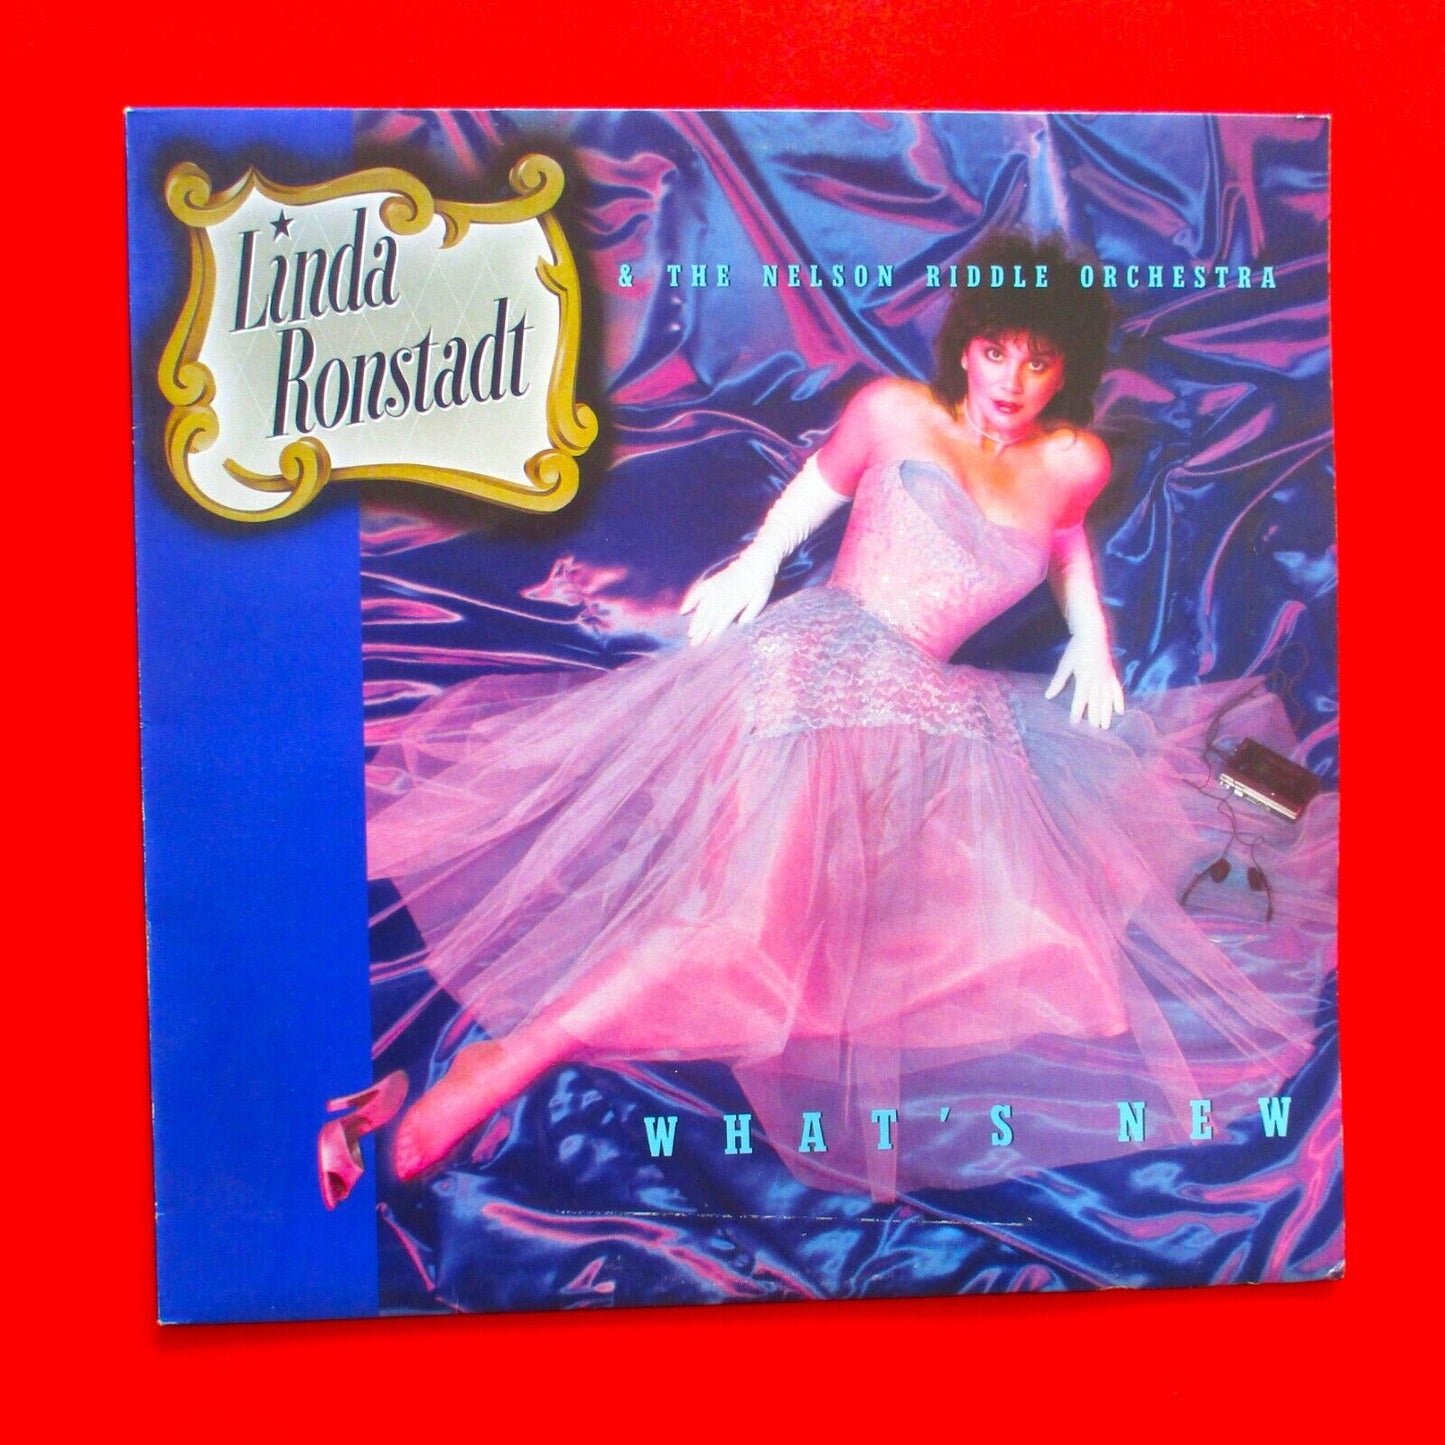 Linda Ronstadt & The Nelson Riddle Orchestra What's New Vinyl LP 1983 Australian